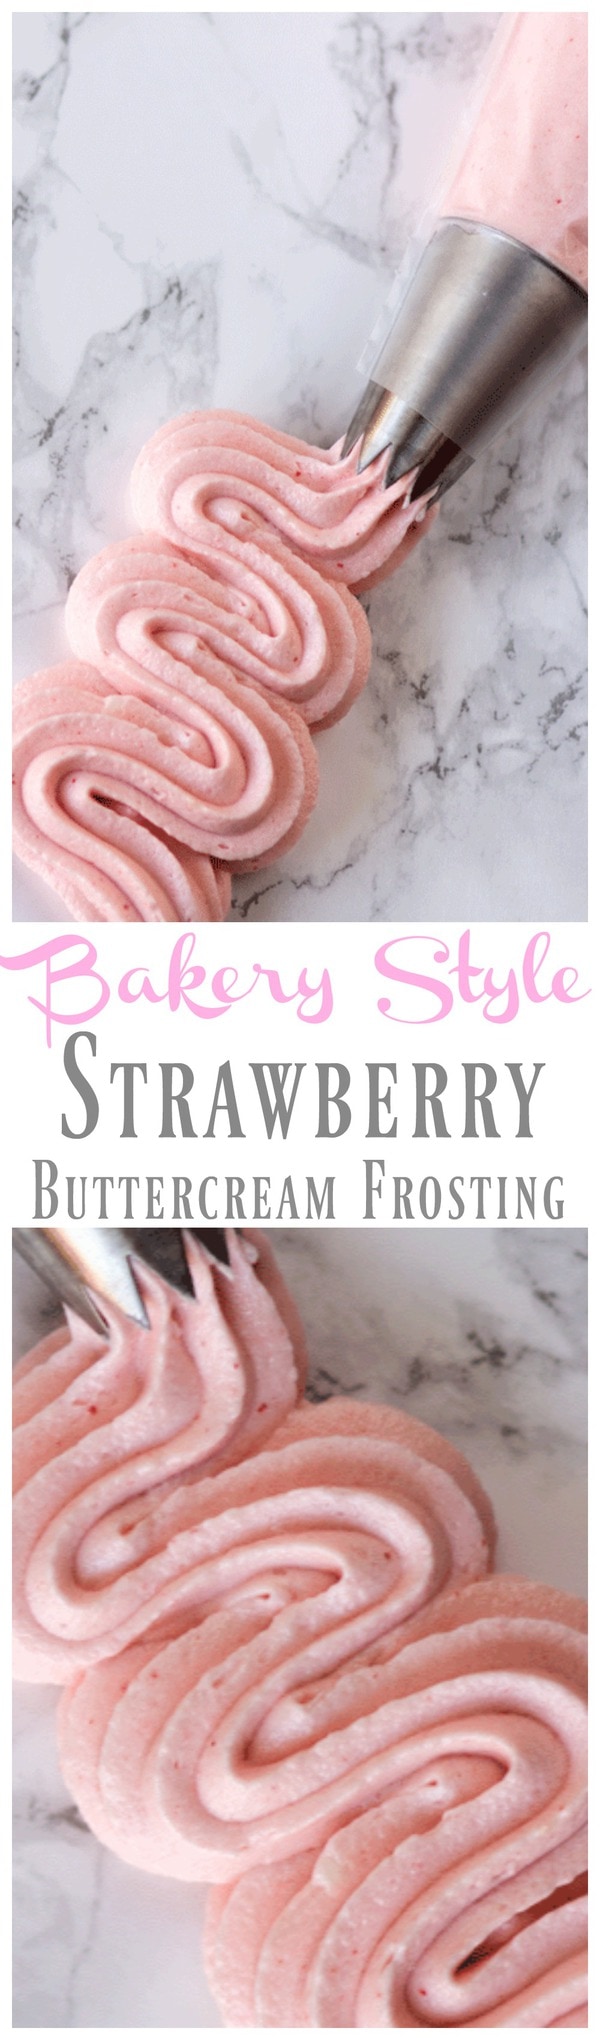 Easy to make Strawberry buttercream frosting, never buy store bought frosting again with this homemade Strawberry buttercream frosting recipe. Homemade Strawberry buttercream frosting is perfect for making cakes. Strawberry buttercream frosting tastes just like a bakery!